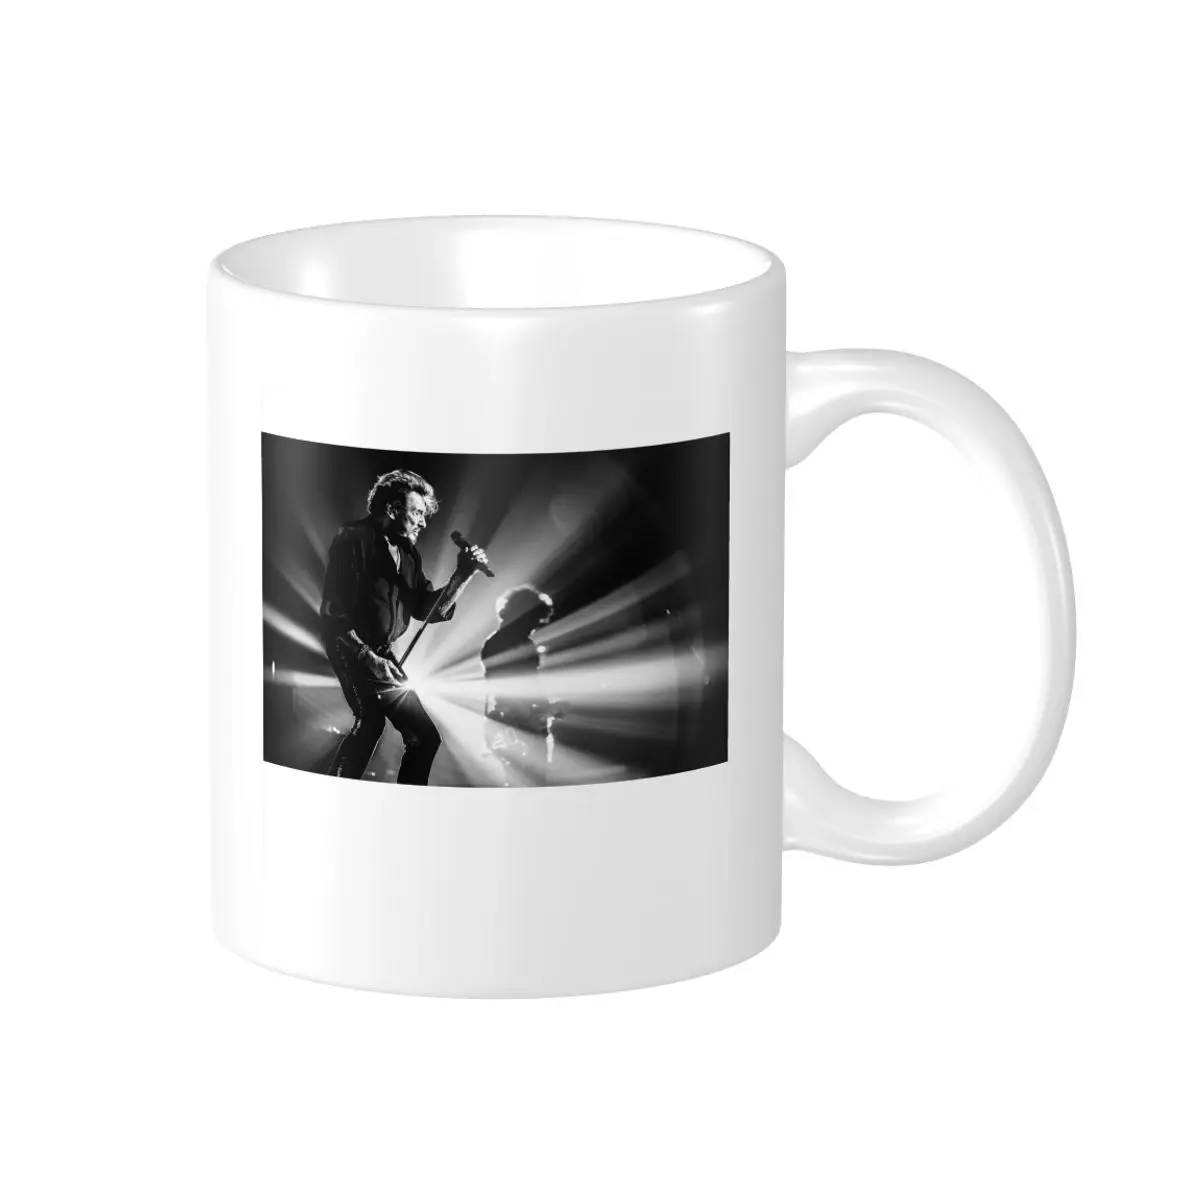 

Promo Johnny And Hallyday Mugs Funny Cups CUPS Print Humor Graphic R337 tea cups